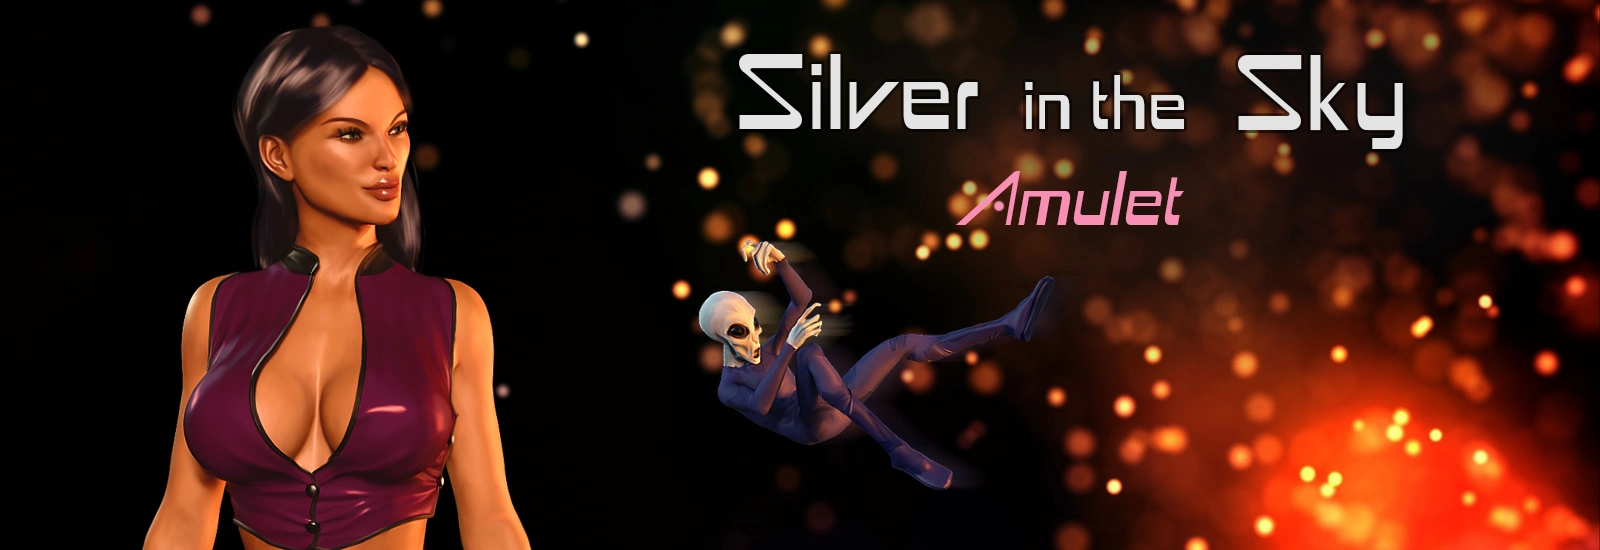 Silver in the Sky - Amulet [v1.01] main image